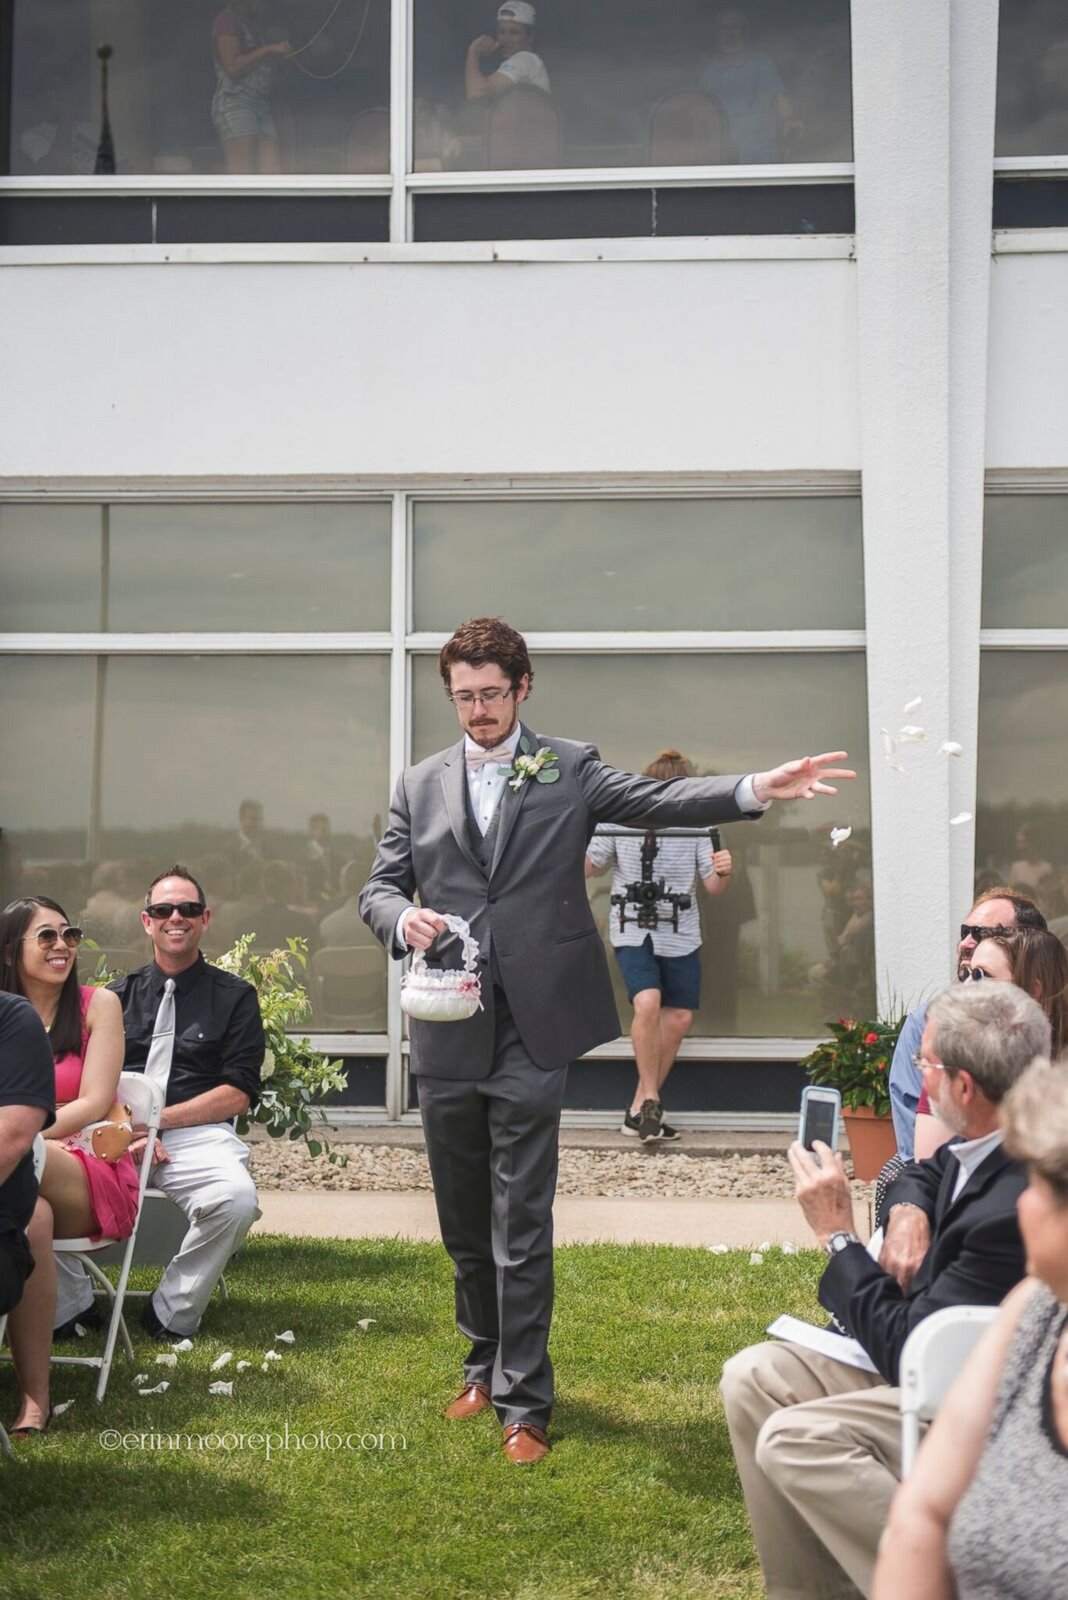 PHOTO: Patrick Casey making his way down the aisle at his cousin's wedding as the "flower man."